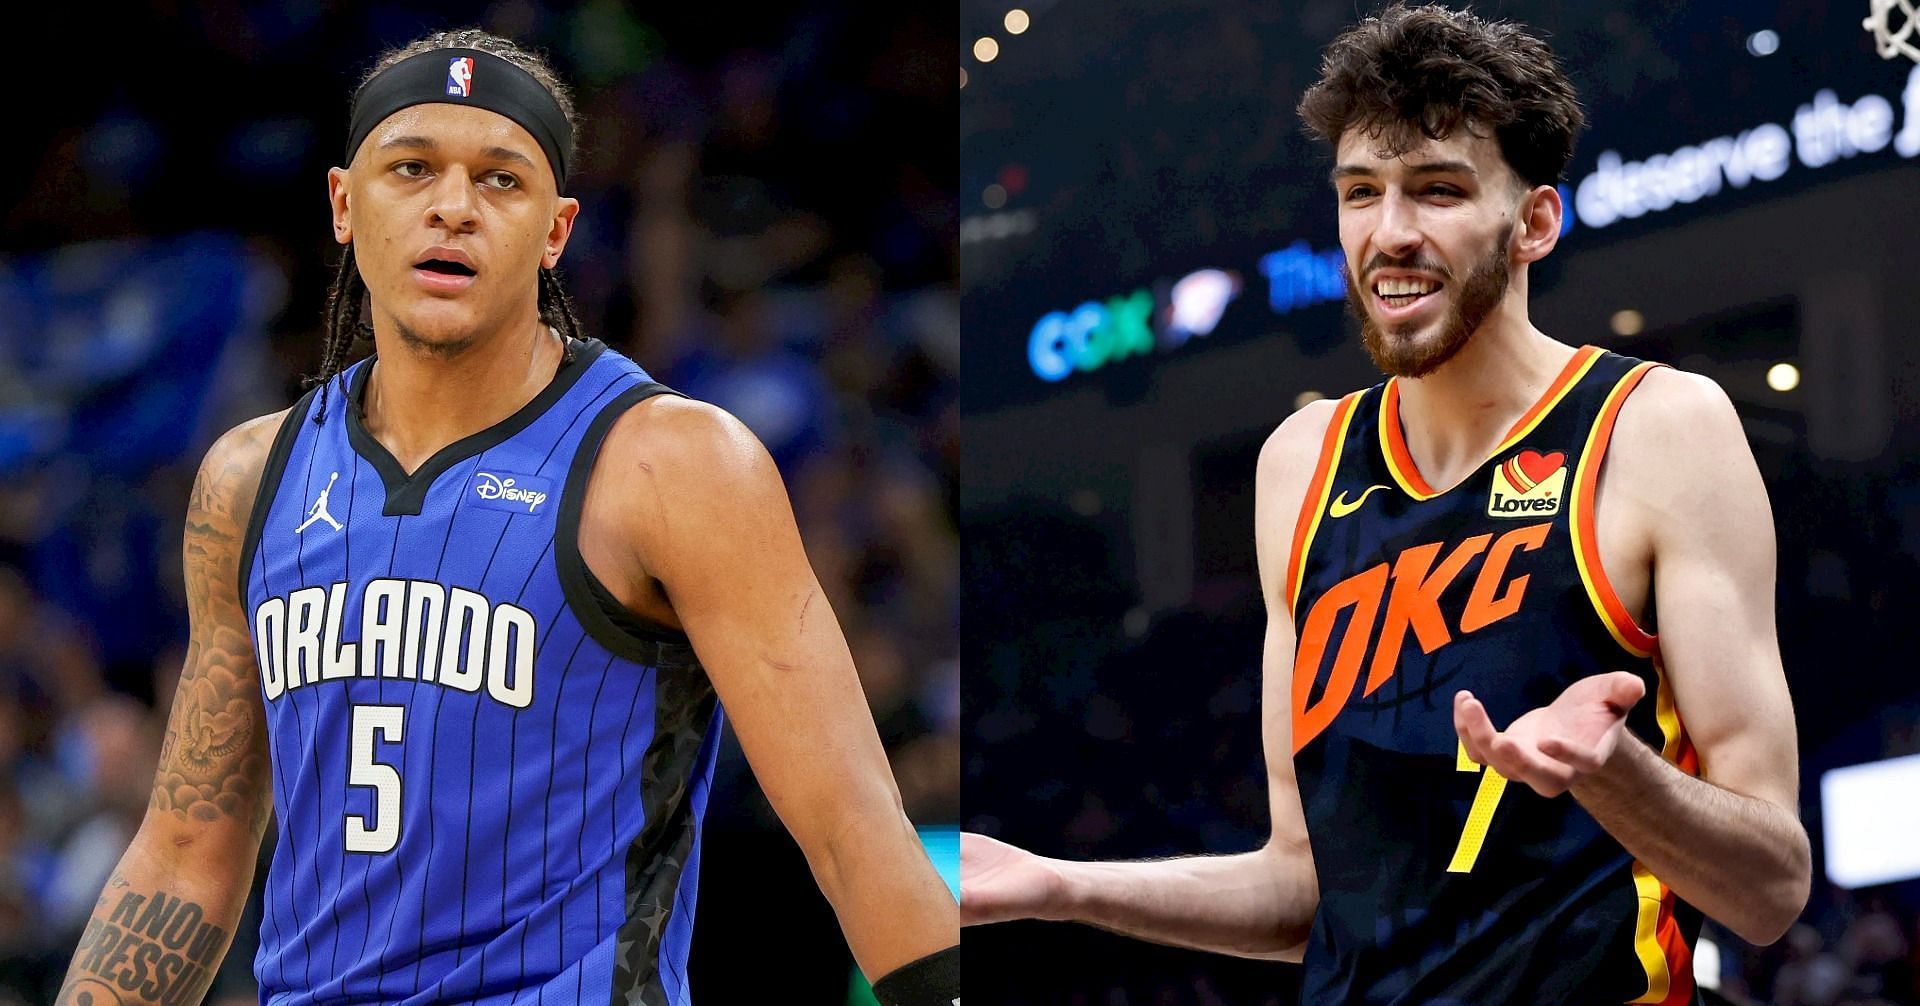 NBA insider&rsquo;s 2022 redraft poll reveals lopsided pick between Paolo Banchero and Chet Holmgren